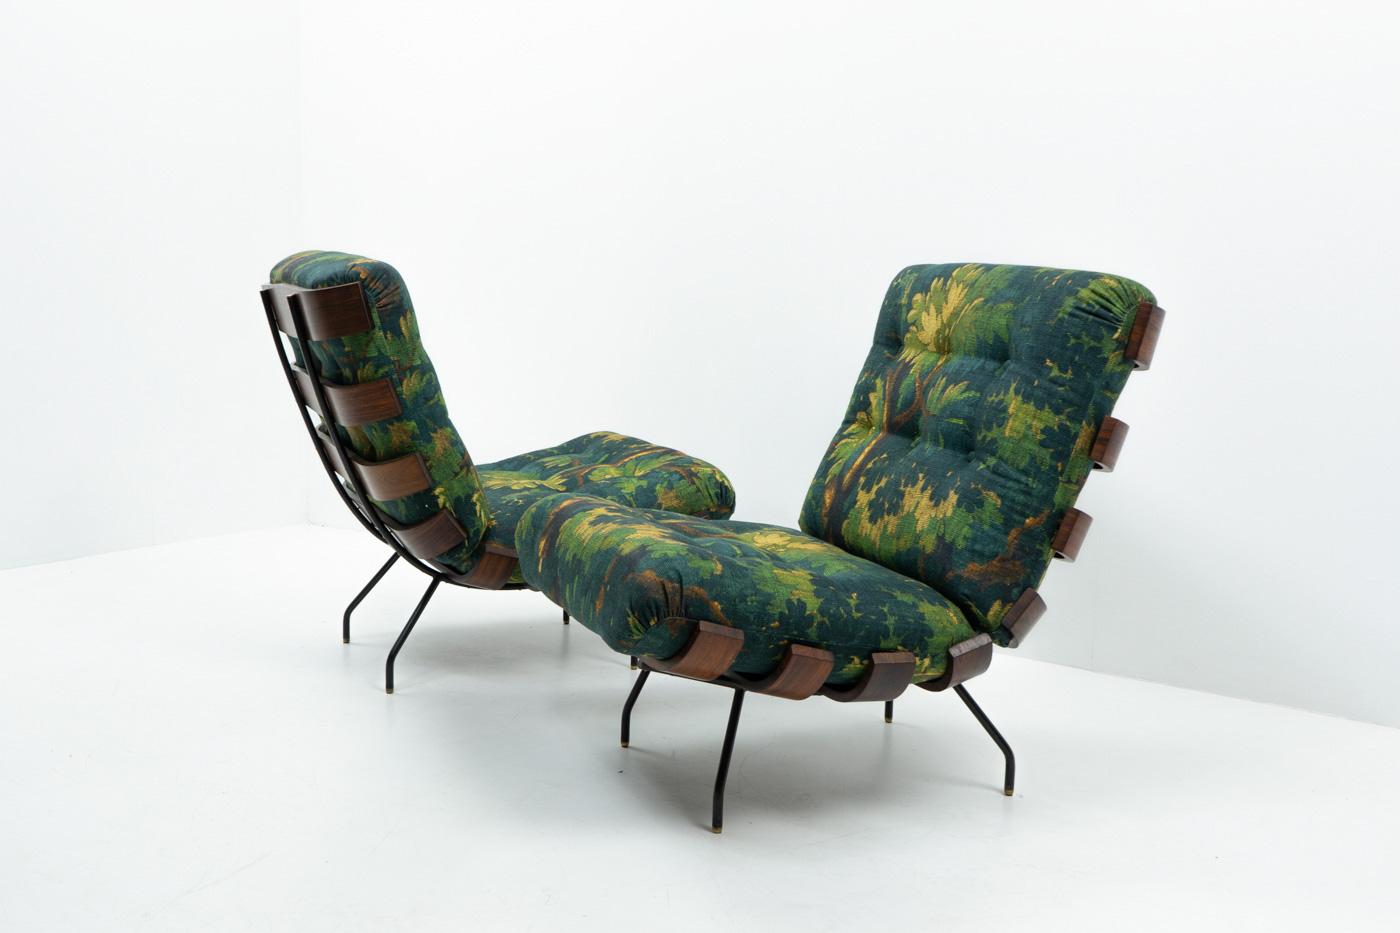 Brazilian Design Costela Lounge Chairs by Hauner & Eisler for Forma, 1950s For Sale 3